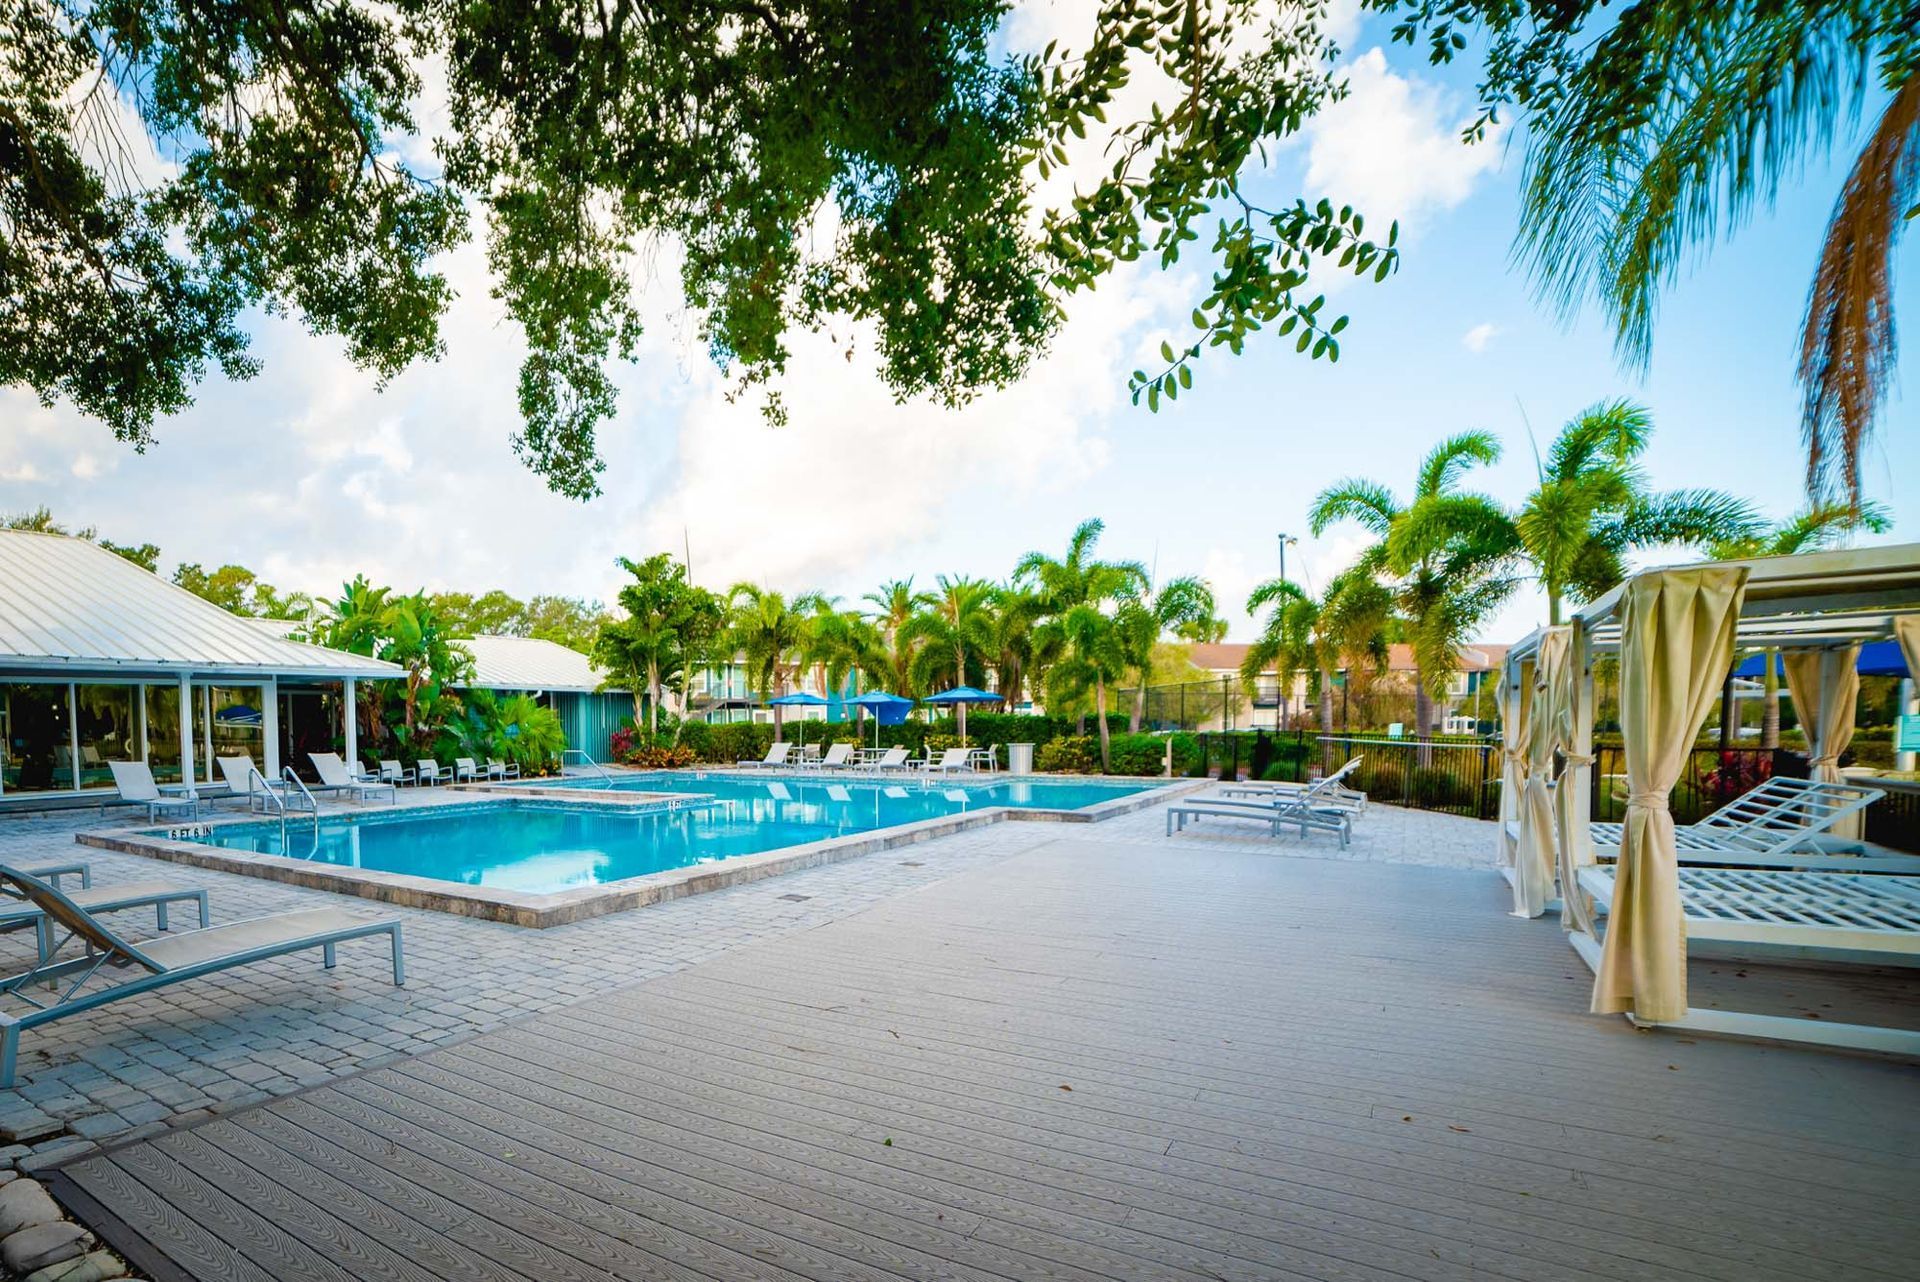 A large swimming pool surrounded by palm trees and chairs at Trellis at The Lakes.